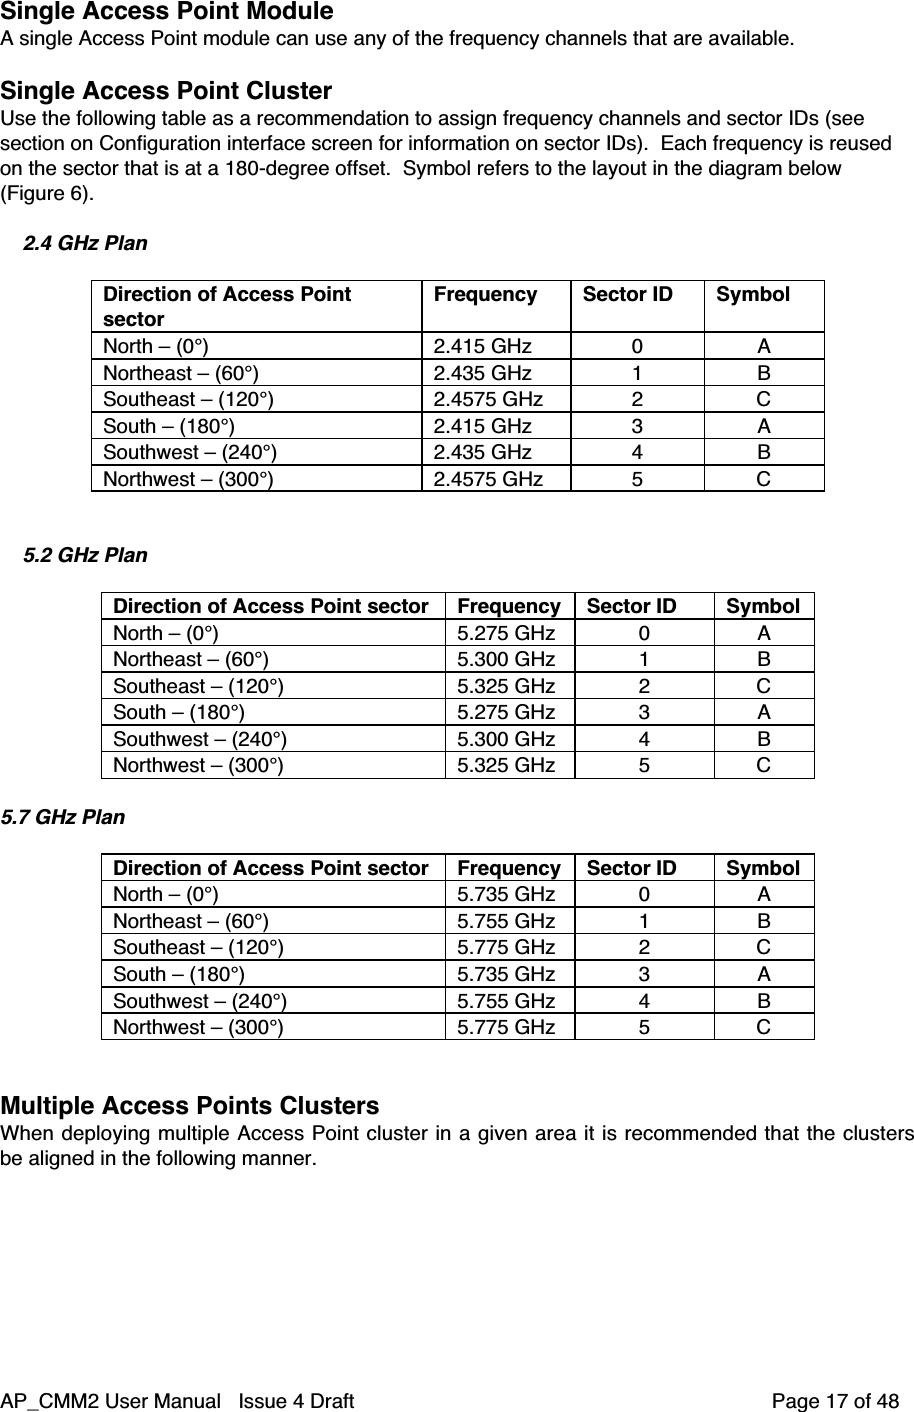 AP_CMM2 User Manual   Issue 4 Draft         Page 17 of 48Single Access Point ModuleA single Access Point module can use any of the frequency channels that are available.Single Access Point ClusterUse the following table as a recommendation to assign frequency channels and sector IDs (seesection on Configuration interface screen for information on sector IDs).  Each frequency is reusedon the sector that is at a 180-degree offset.  Symbol refers to the layout in the diagram below(Figure 6).2.4 GHz PlanDirection of Access PointsectorFrequency Sector ID SymbolNorth – (0°) 2.415 GHz 0 ANortheast – (60°) 2.435 GHz 1 BSoutheast – (120°) 2.4575 GHz 2 CSouth – (180°) 2.415 GHz 3 ASouthwest – (240°) 2.435 GHz 4 BNorthwest – (300°) 2.4575 GHz 5 C5.2 GHz PlanDirection of Access Point sector Frequency Sector ID SymbolNorth – (0°) 5.275 GHz 0 ANortheast – (60°) 5.300 GHz 1 BSoutheast – (120°) 5.325 GHz 2 CSouth – (180°) 5.275 GHz 3 ASouthwest – (240°) 5.300 GHz 4 BNorthwest – (300°) 5.325 GHz 5 C5.7 GHz PlanDirection of Access Point sector Frequency Sector ID SymbolNorth – (0°) 5.735 GHz 0 ANortheast – (60°) 5.755 GHz 1 BSoutheast – (120°) 5.775 GHz 2 CSouth – (180°) 5.735 GHz 3 ASouthwest – (240°) 5.755 GHz 4 BNorthwest – (300°) 5.775 GHz 5 CMultiple Access Points ClustersWhen deploying multiple Access Point cluster in a given area it is recommended that the clustersbe aligned in the following manner.